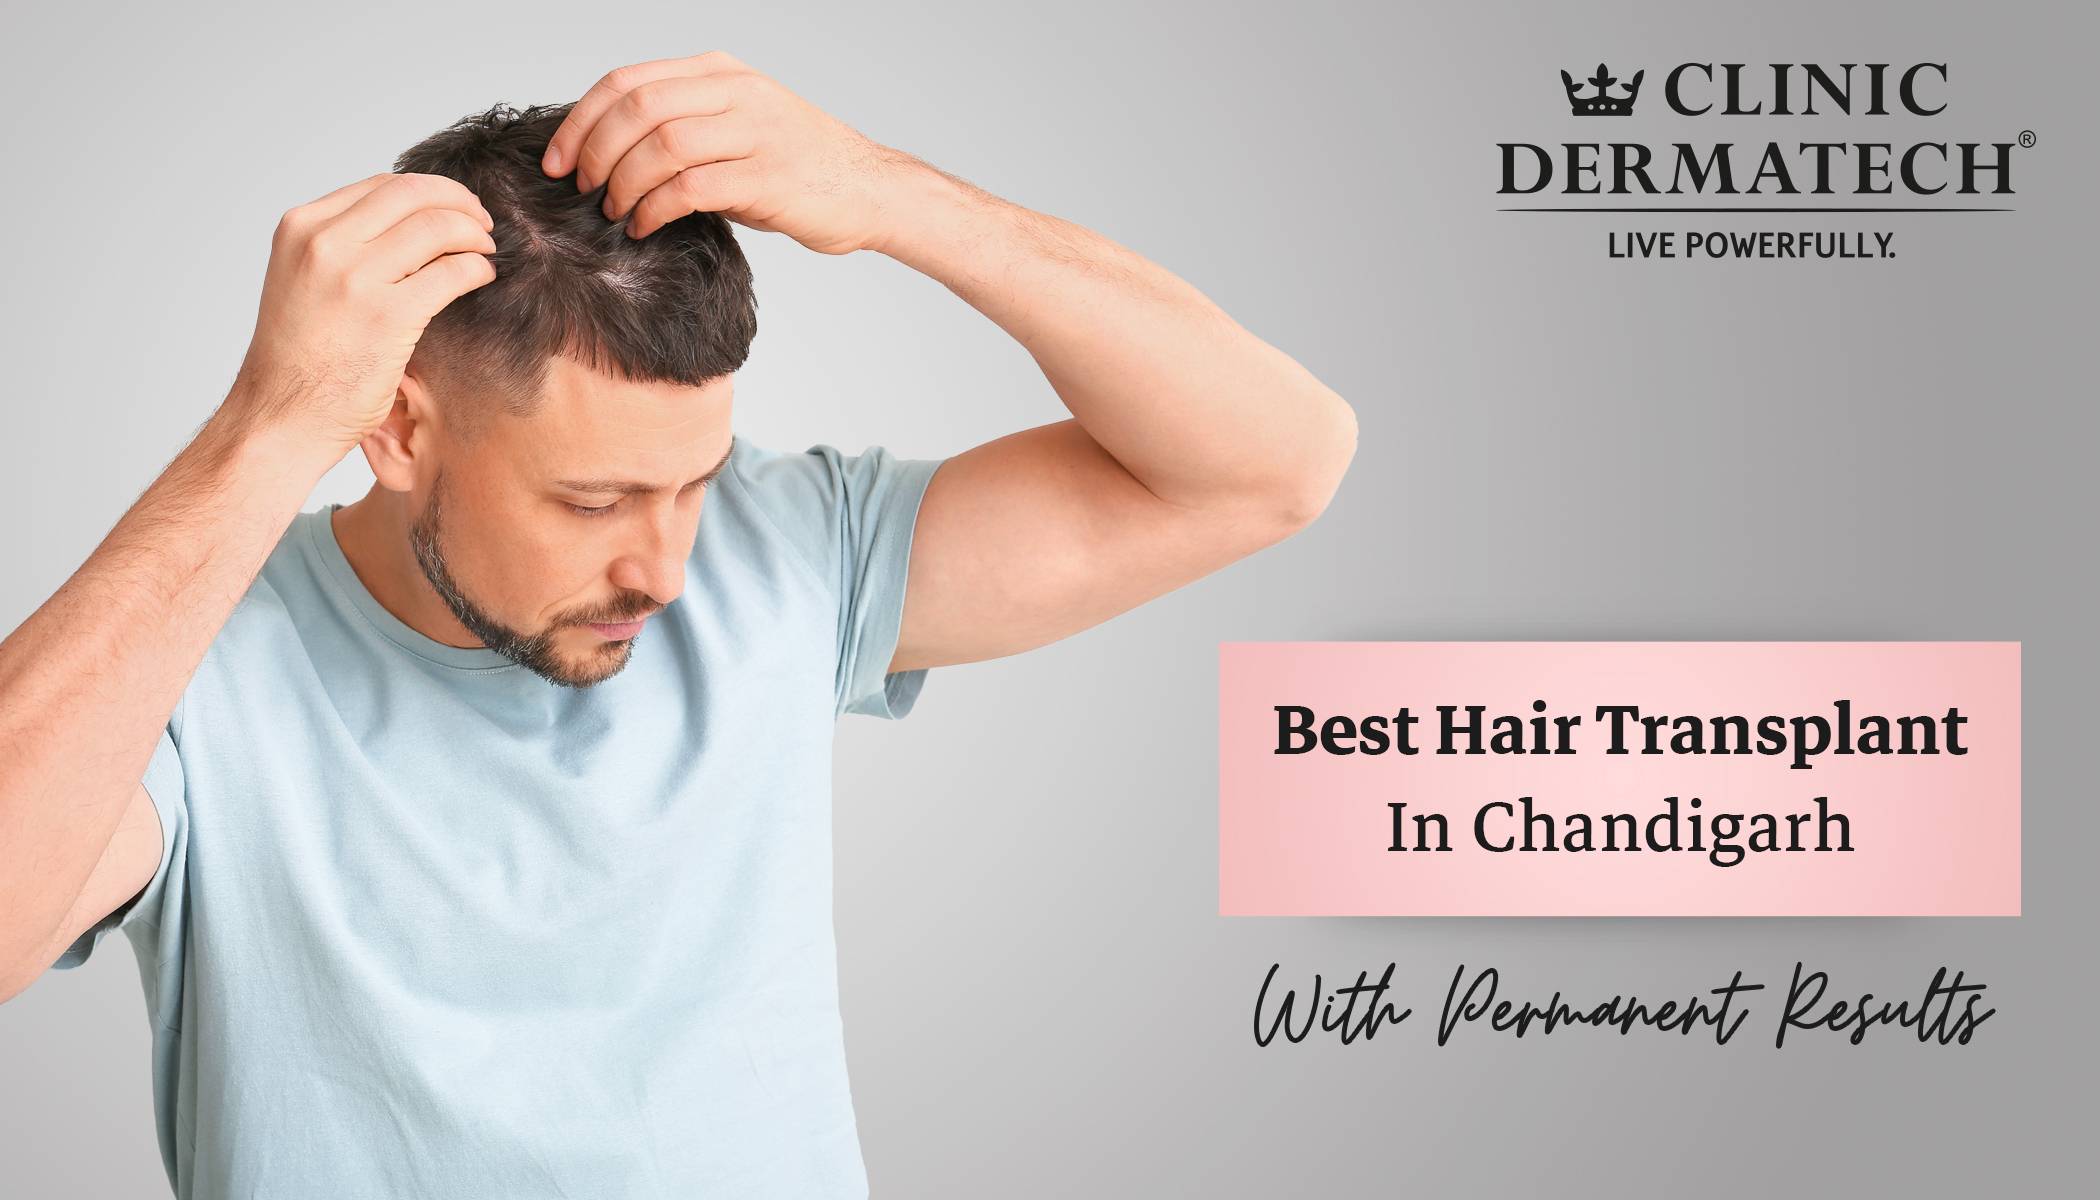 Cosmo Care  Hair Clinic on Twitter Hair transplant before and after See  the hair transplant results that set Natural Hair Transplants  cosmocareandhairclinic Hairtransplant clinic result Chandigarh  beforeandafter hair surgery httpstco 